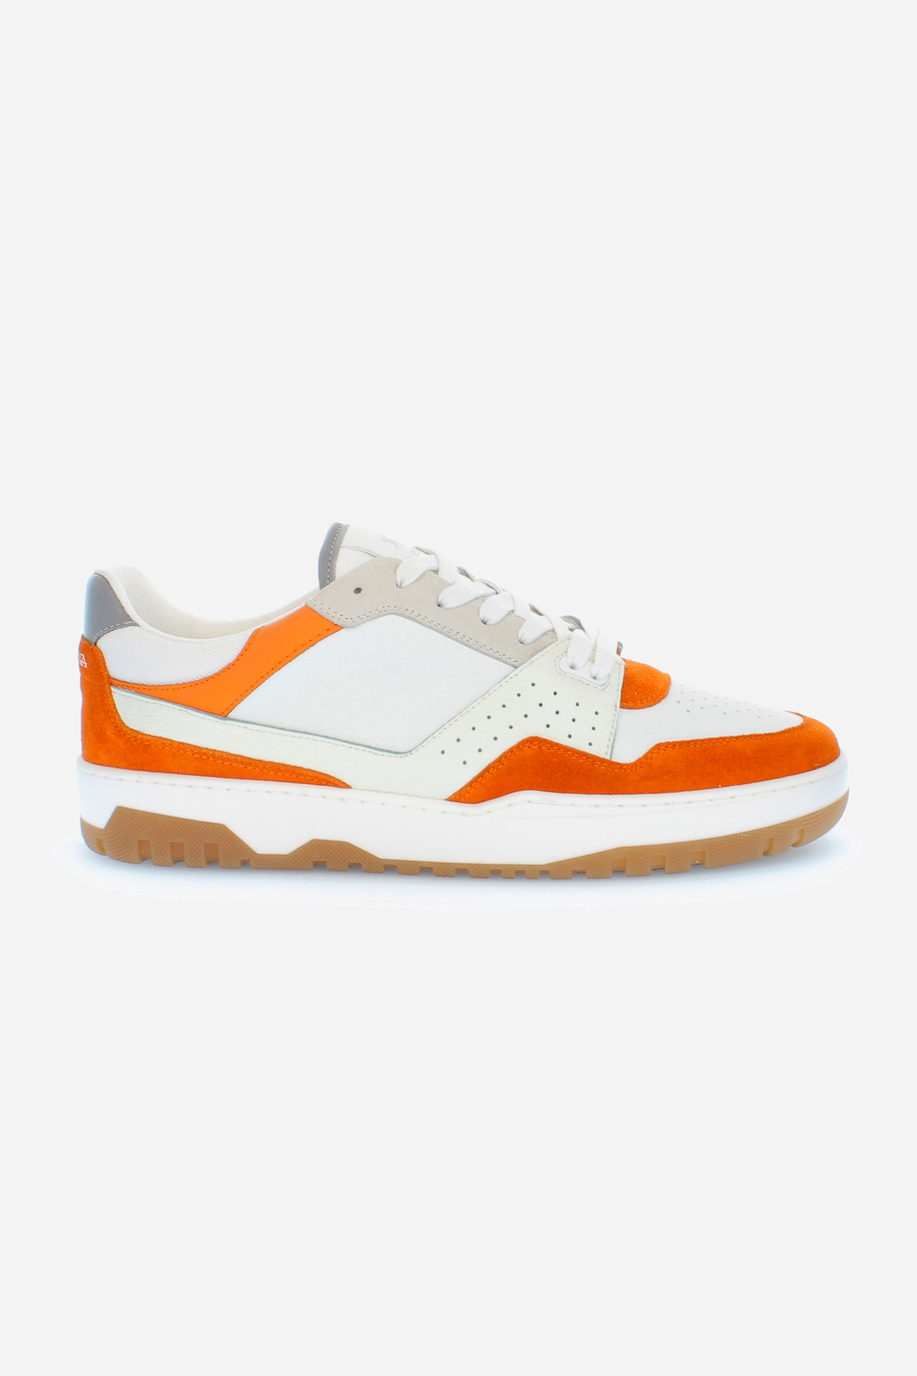 New vintage men's basketball sneaker in mixed vegetable leather - Field 85 - test | La Martina - Official Online Shop